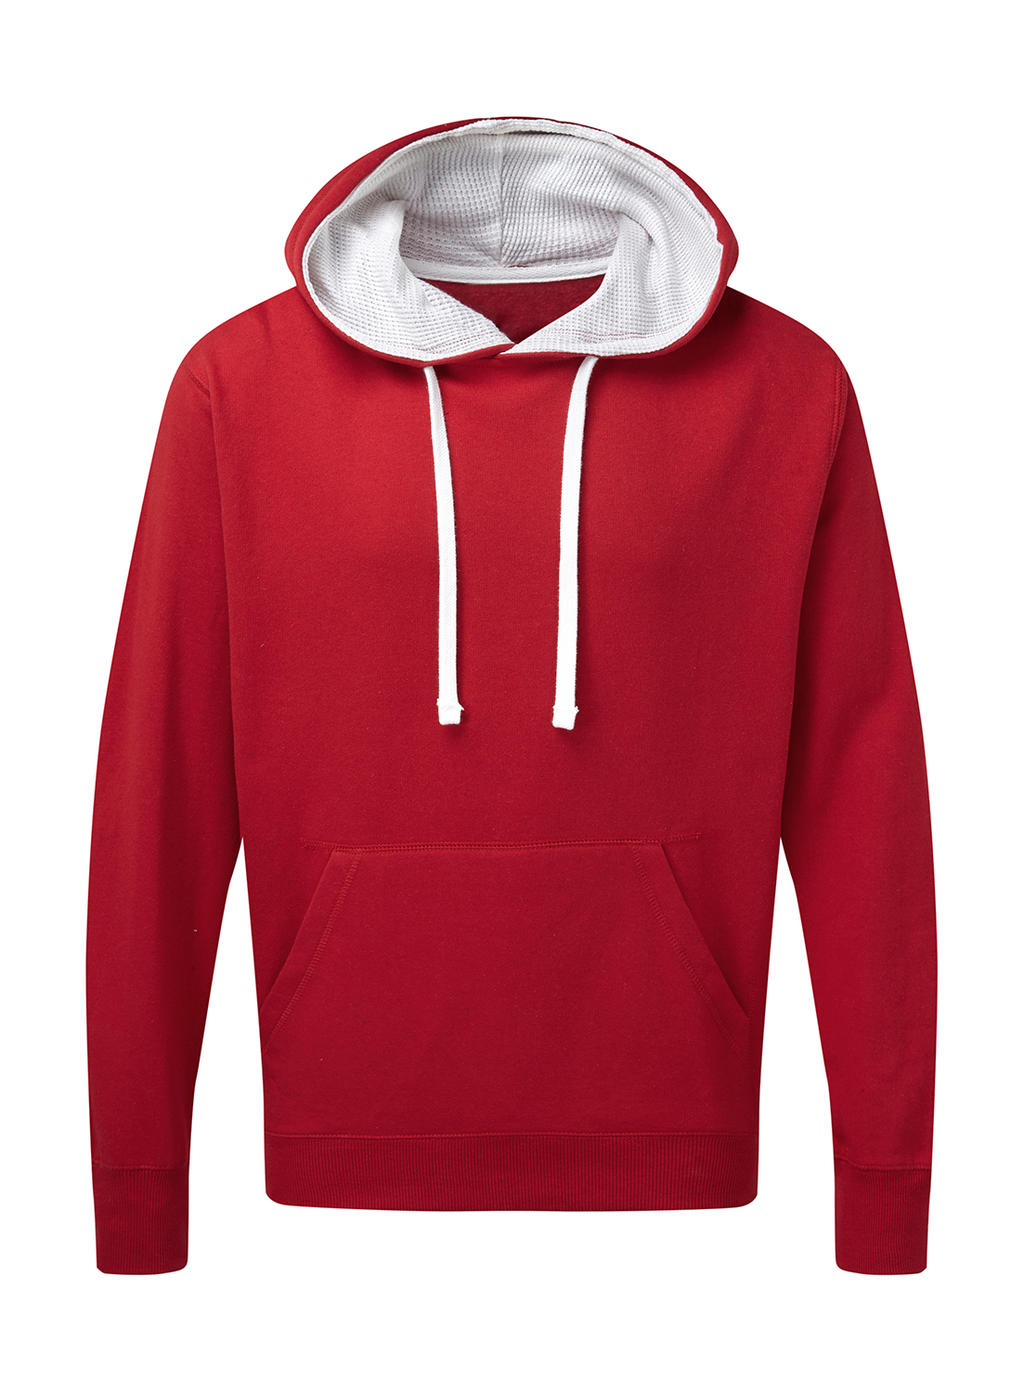  Mens Contrast Hoodie in Farbe Red/White